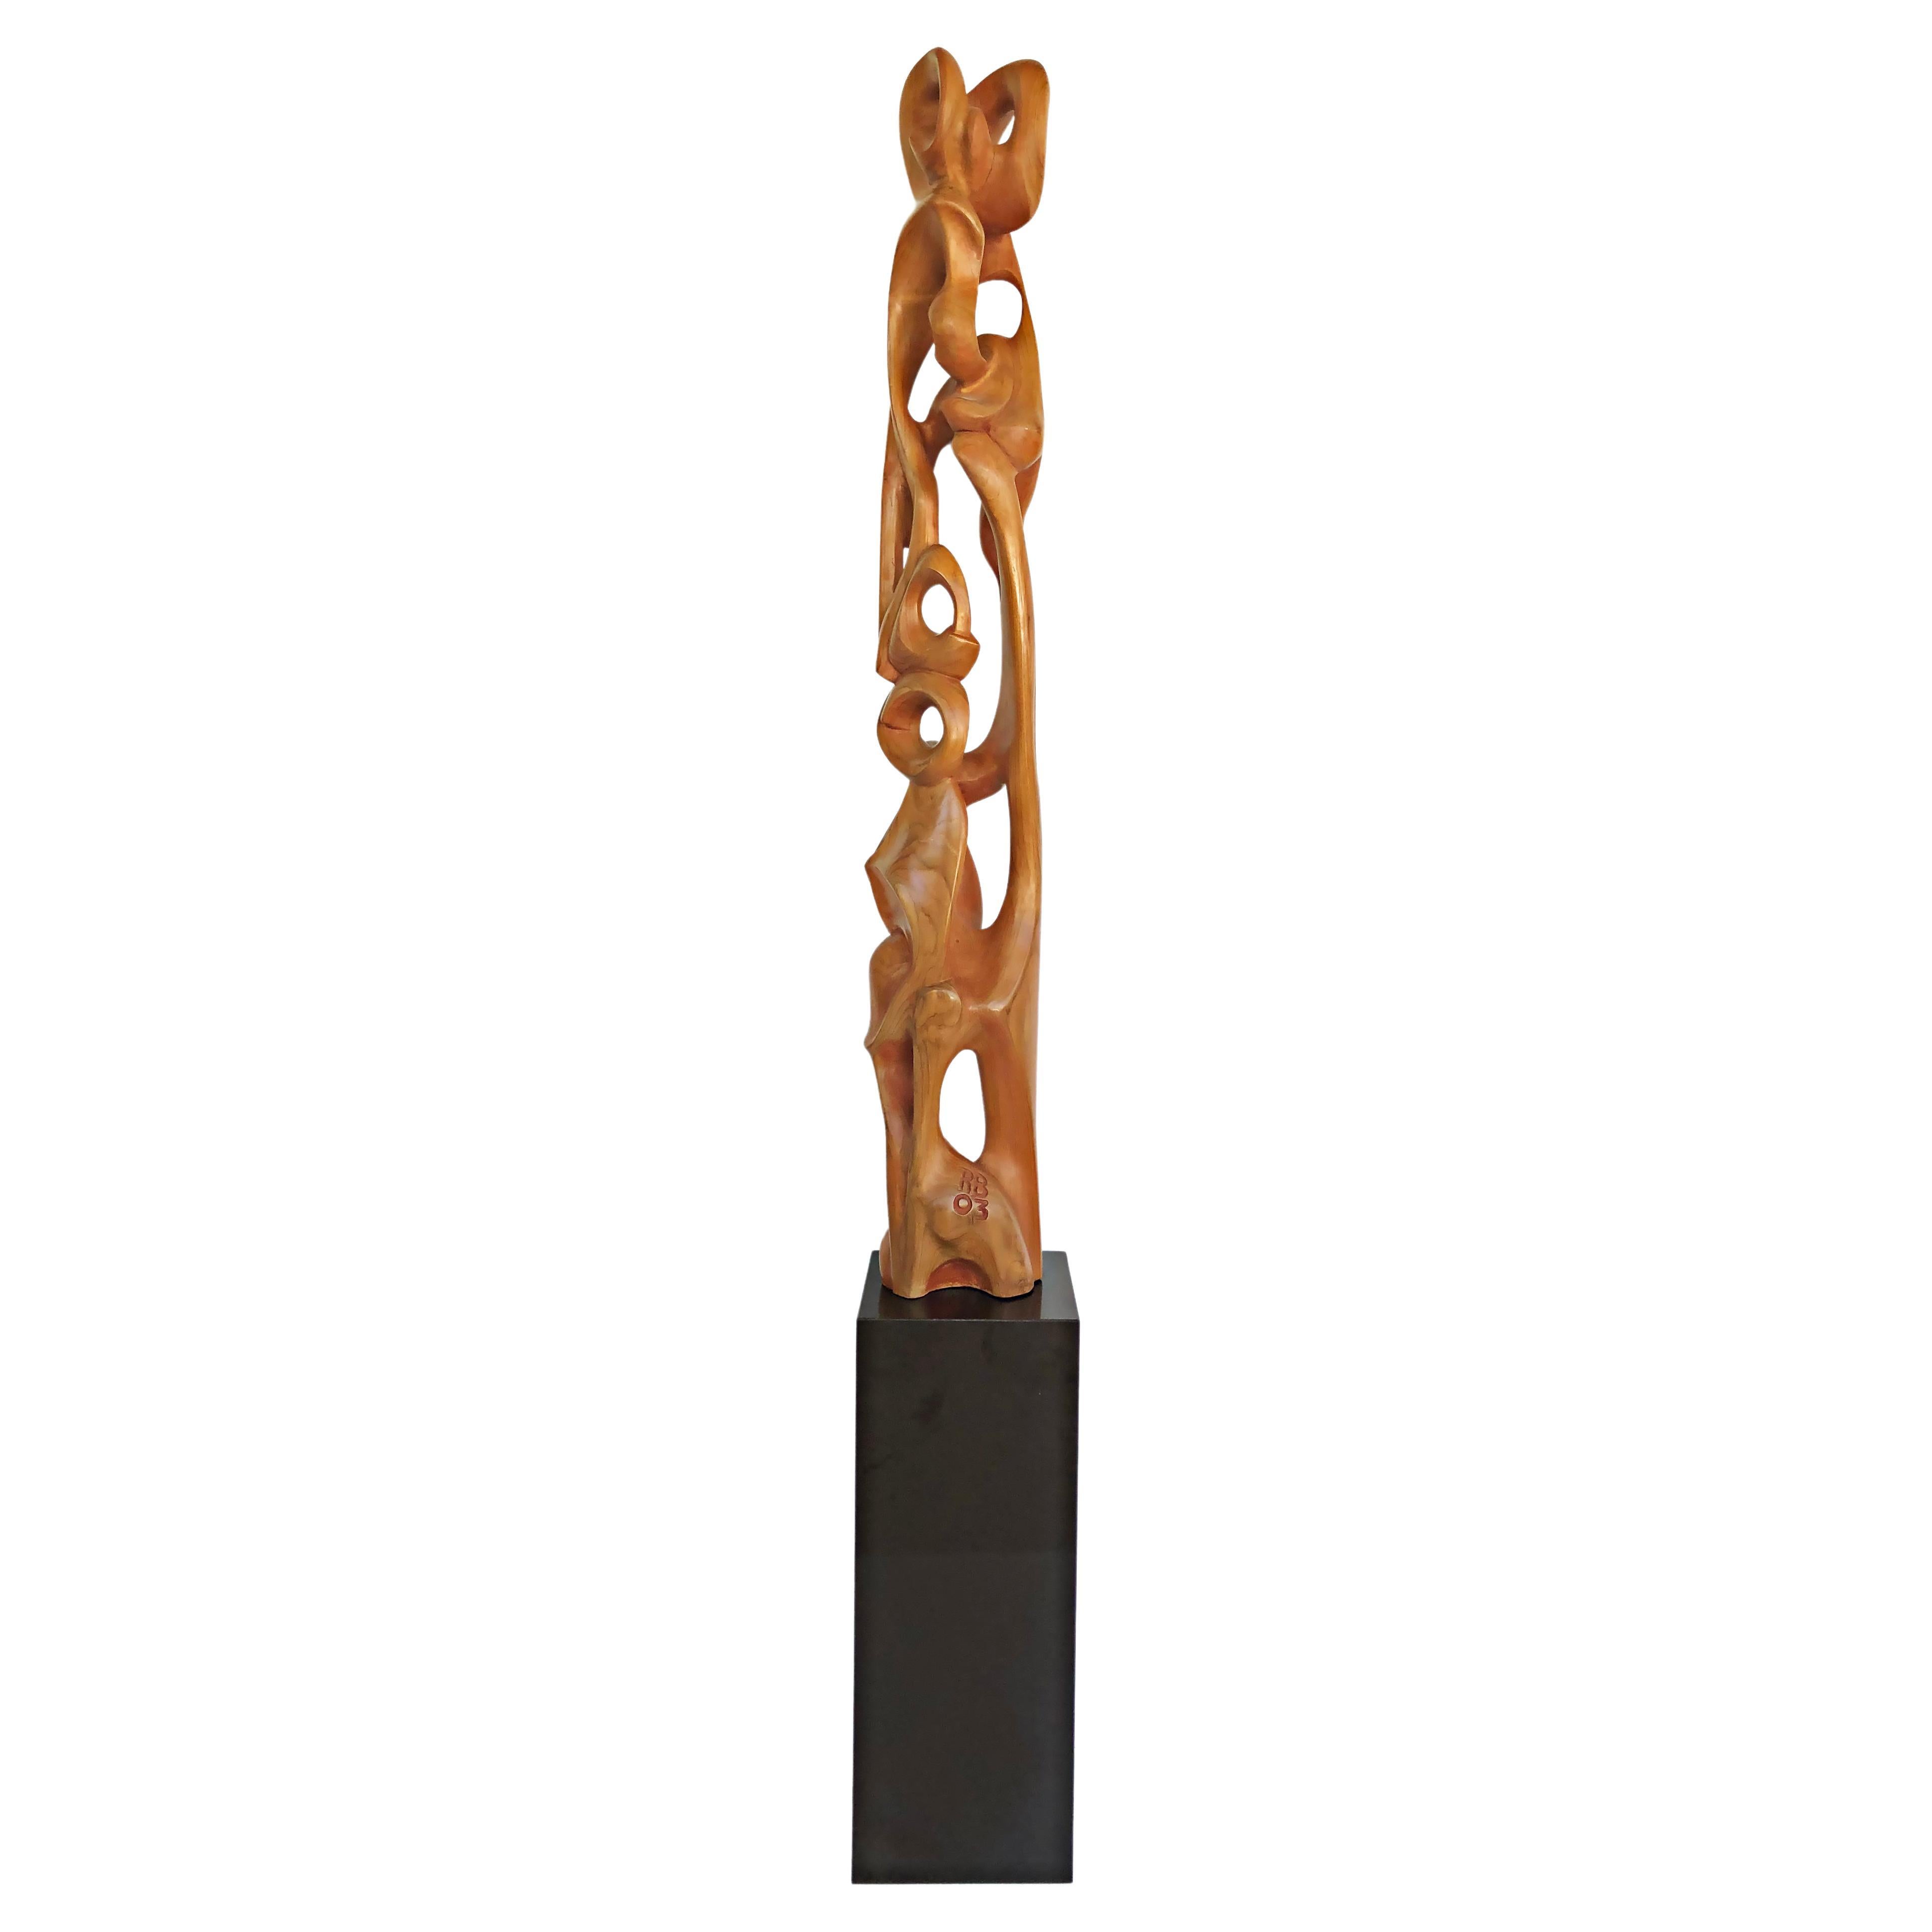 Tall Carved Teak Sculpture by Ramon Barales, Cuban American Artist, 2003 For Sale